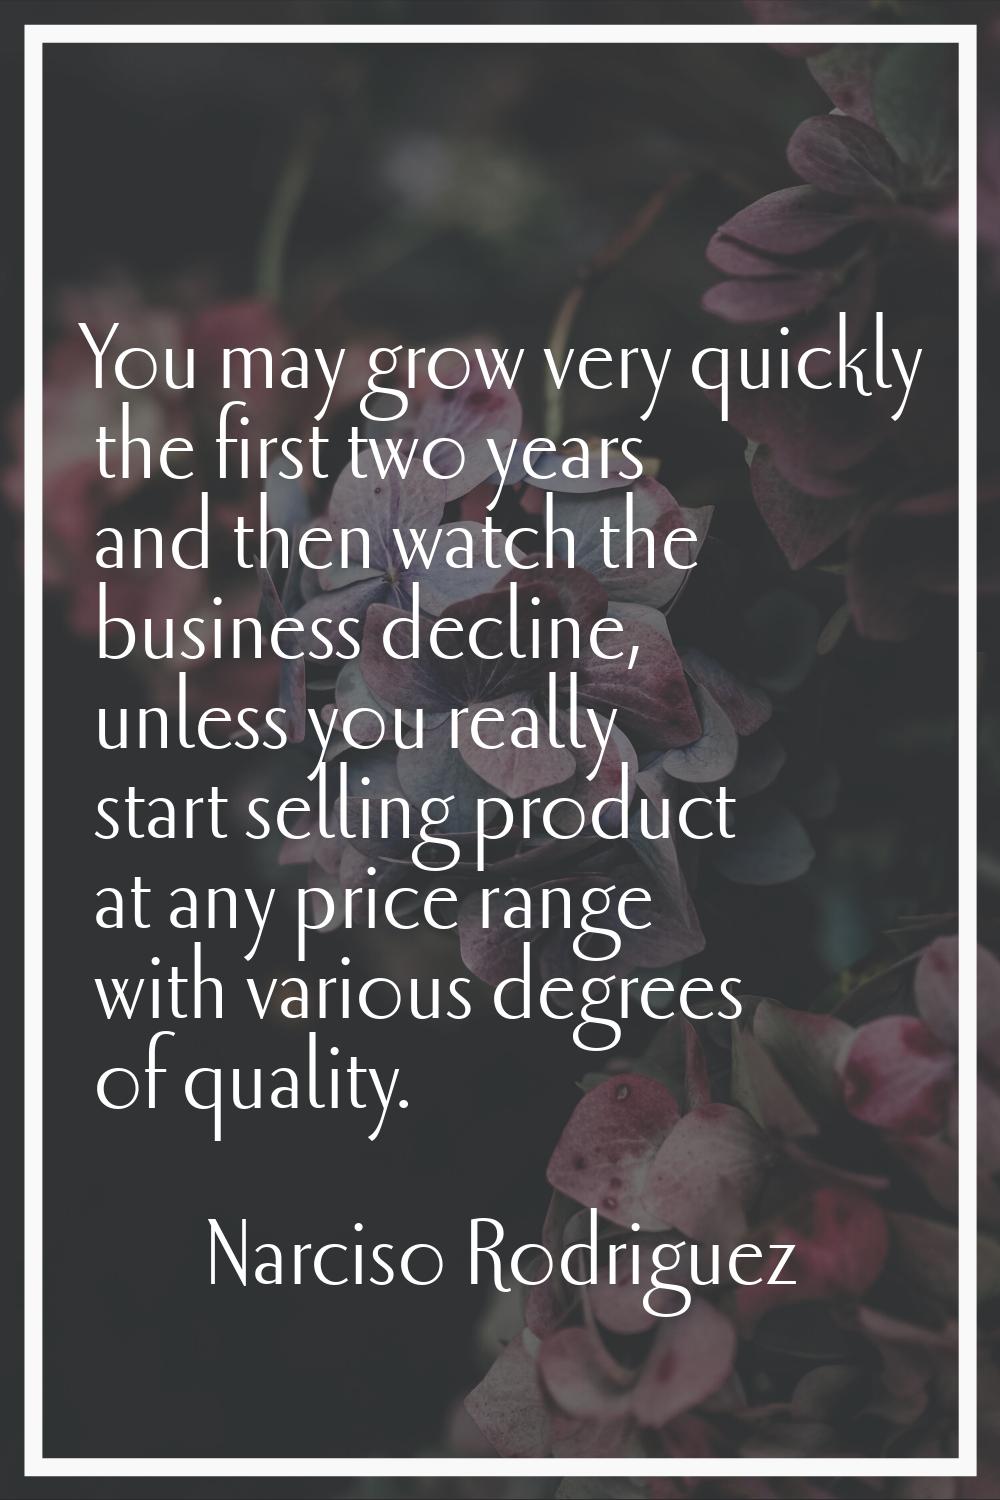 You may grow very quickly the first two years and then watch the business decline, unless you reall